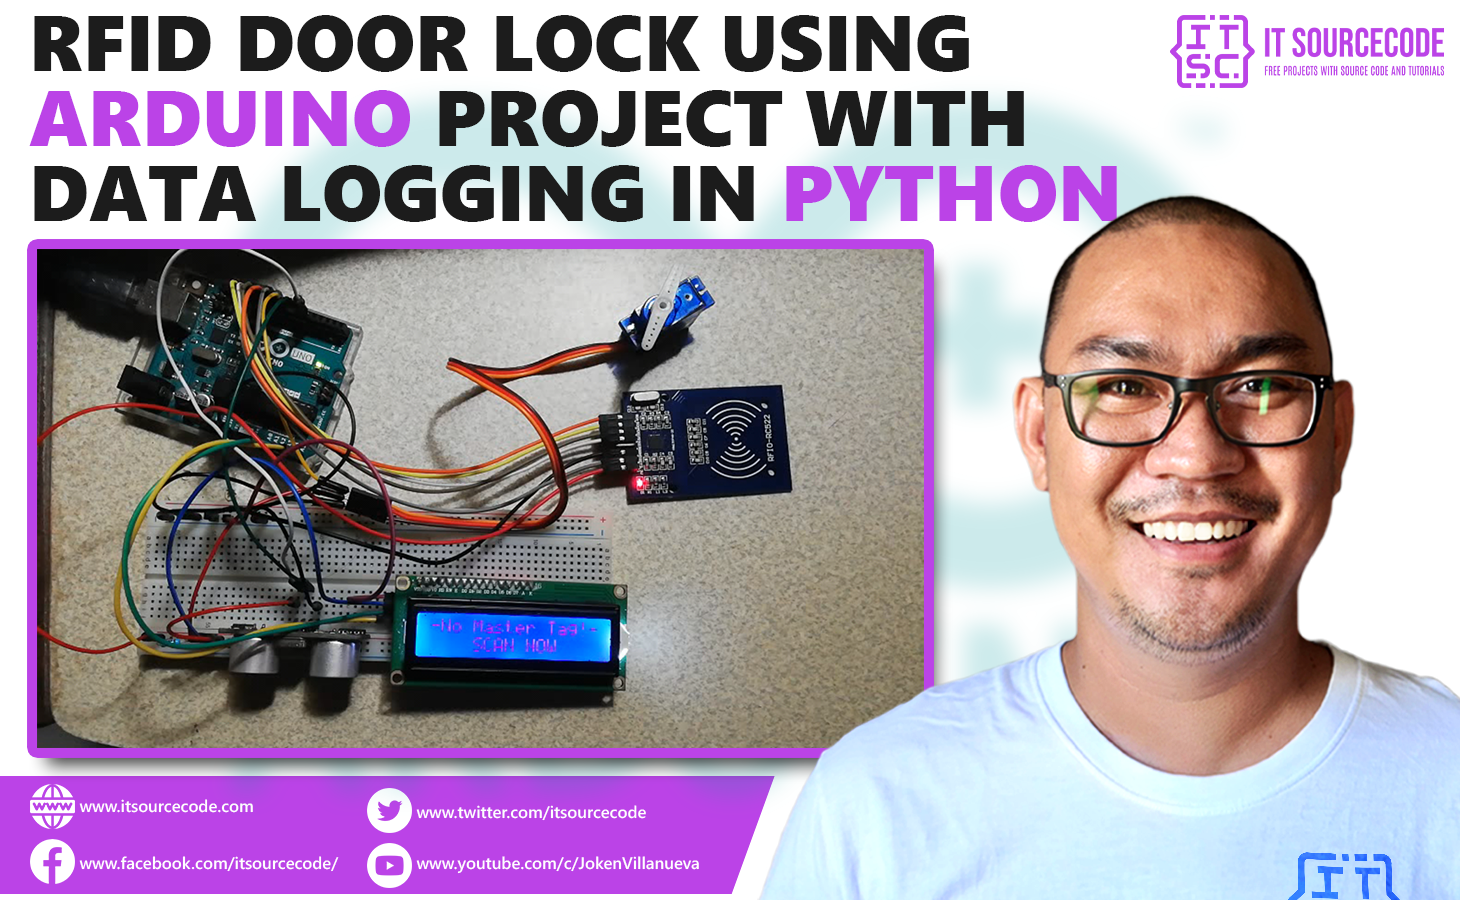 RFID Door Lock with Data Logging Project in Arduino and Python